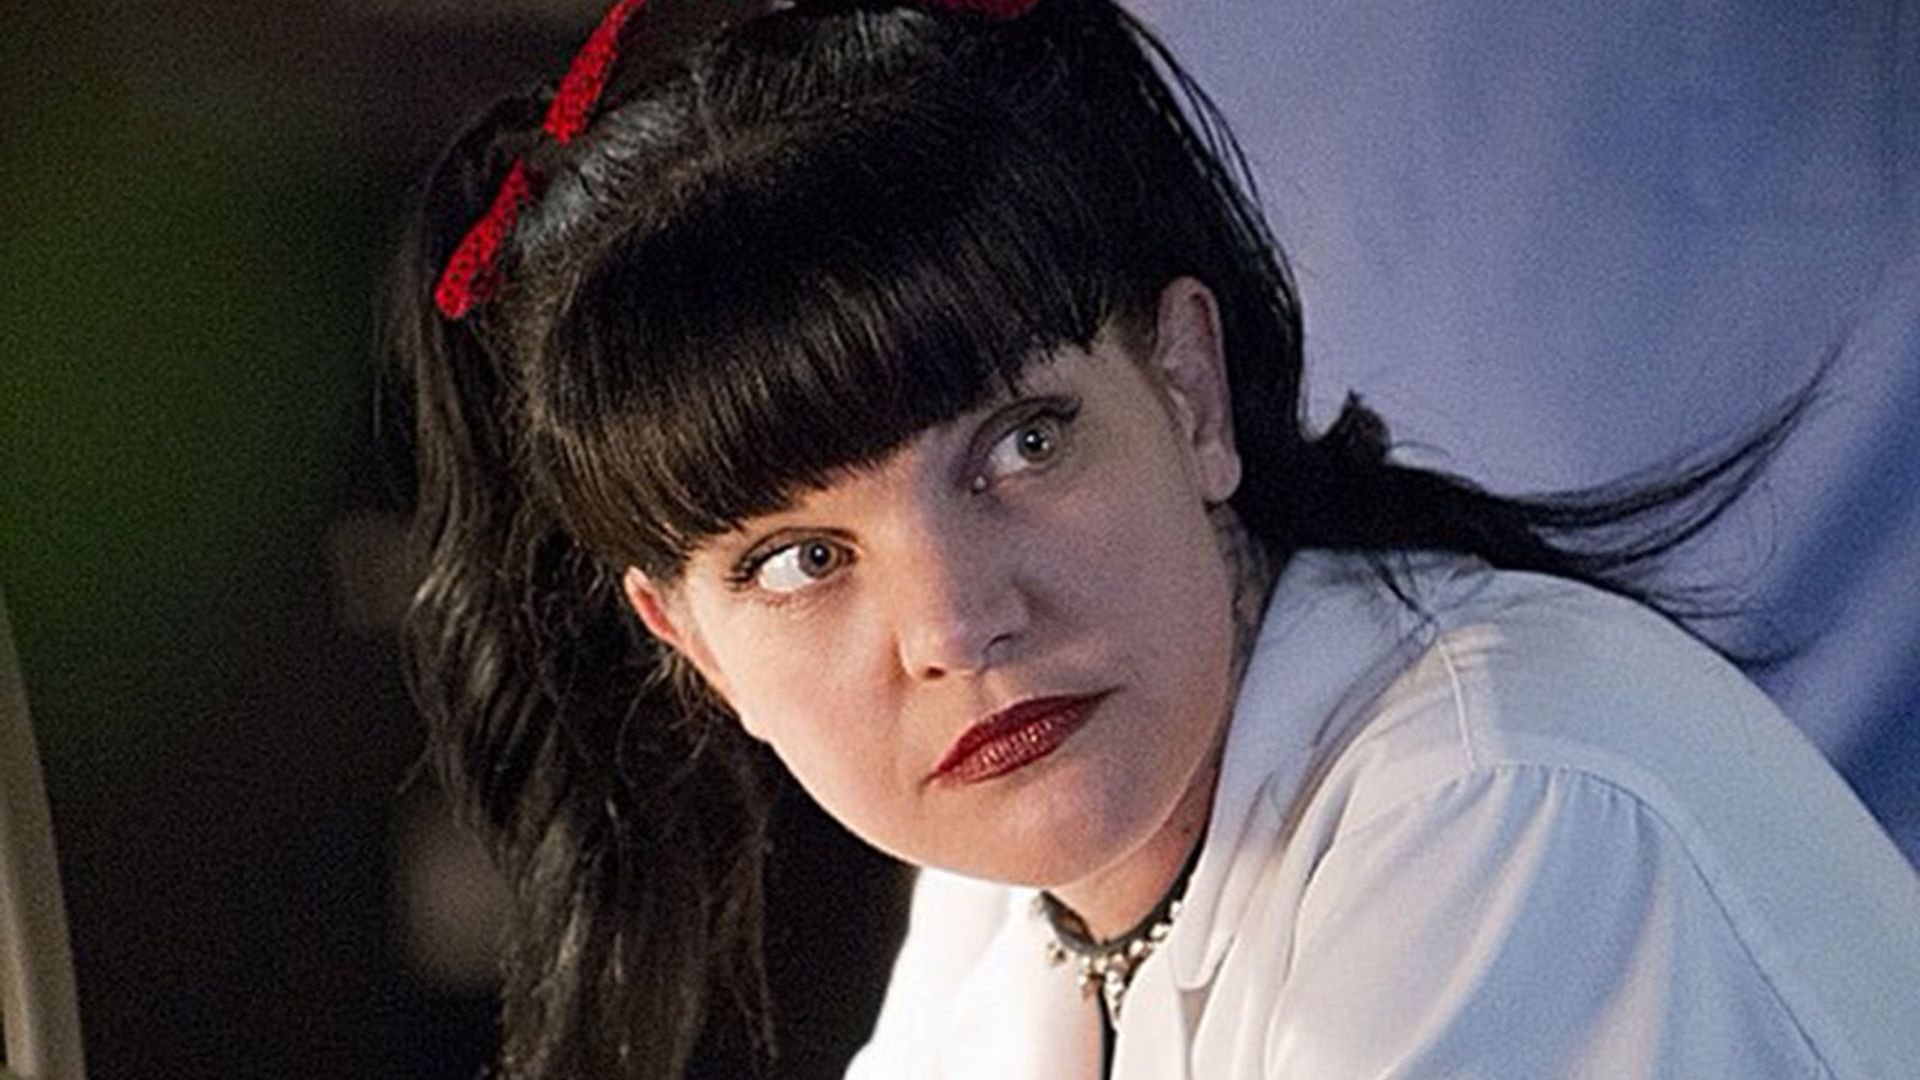 NCIS' Pauley Perrette inundated with prayers and support after ...